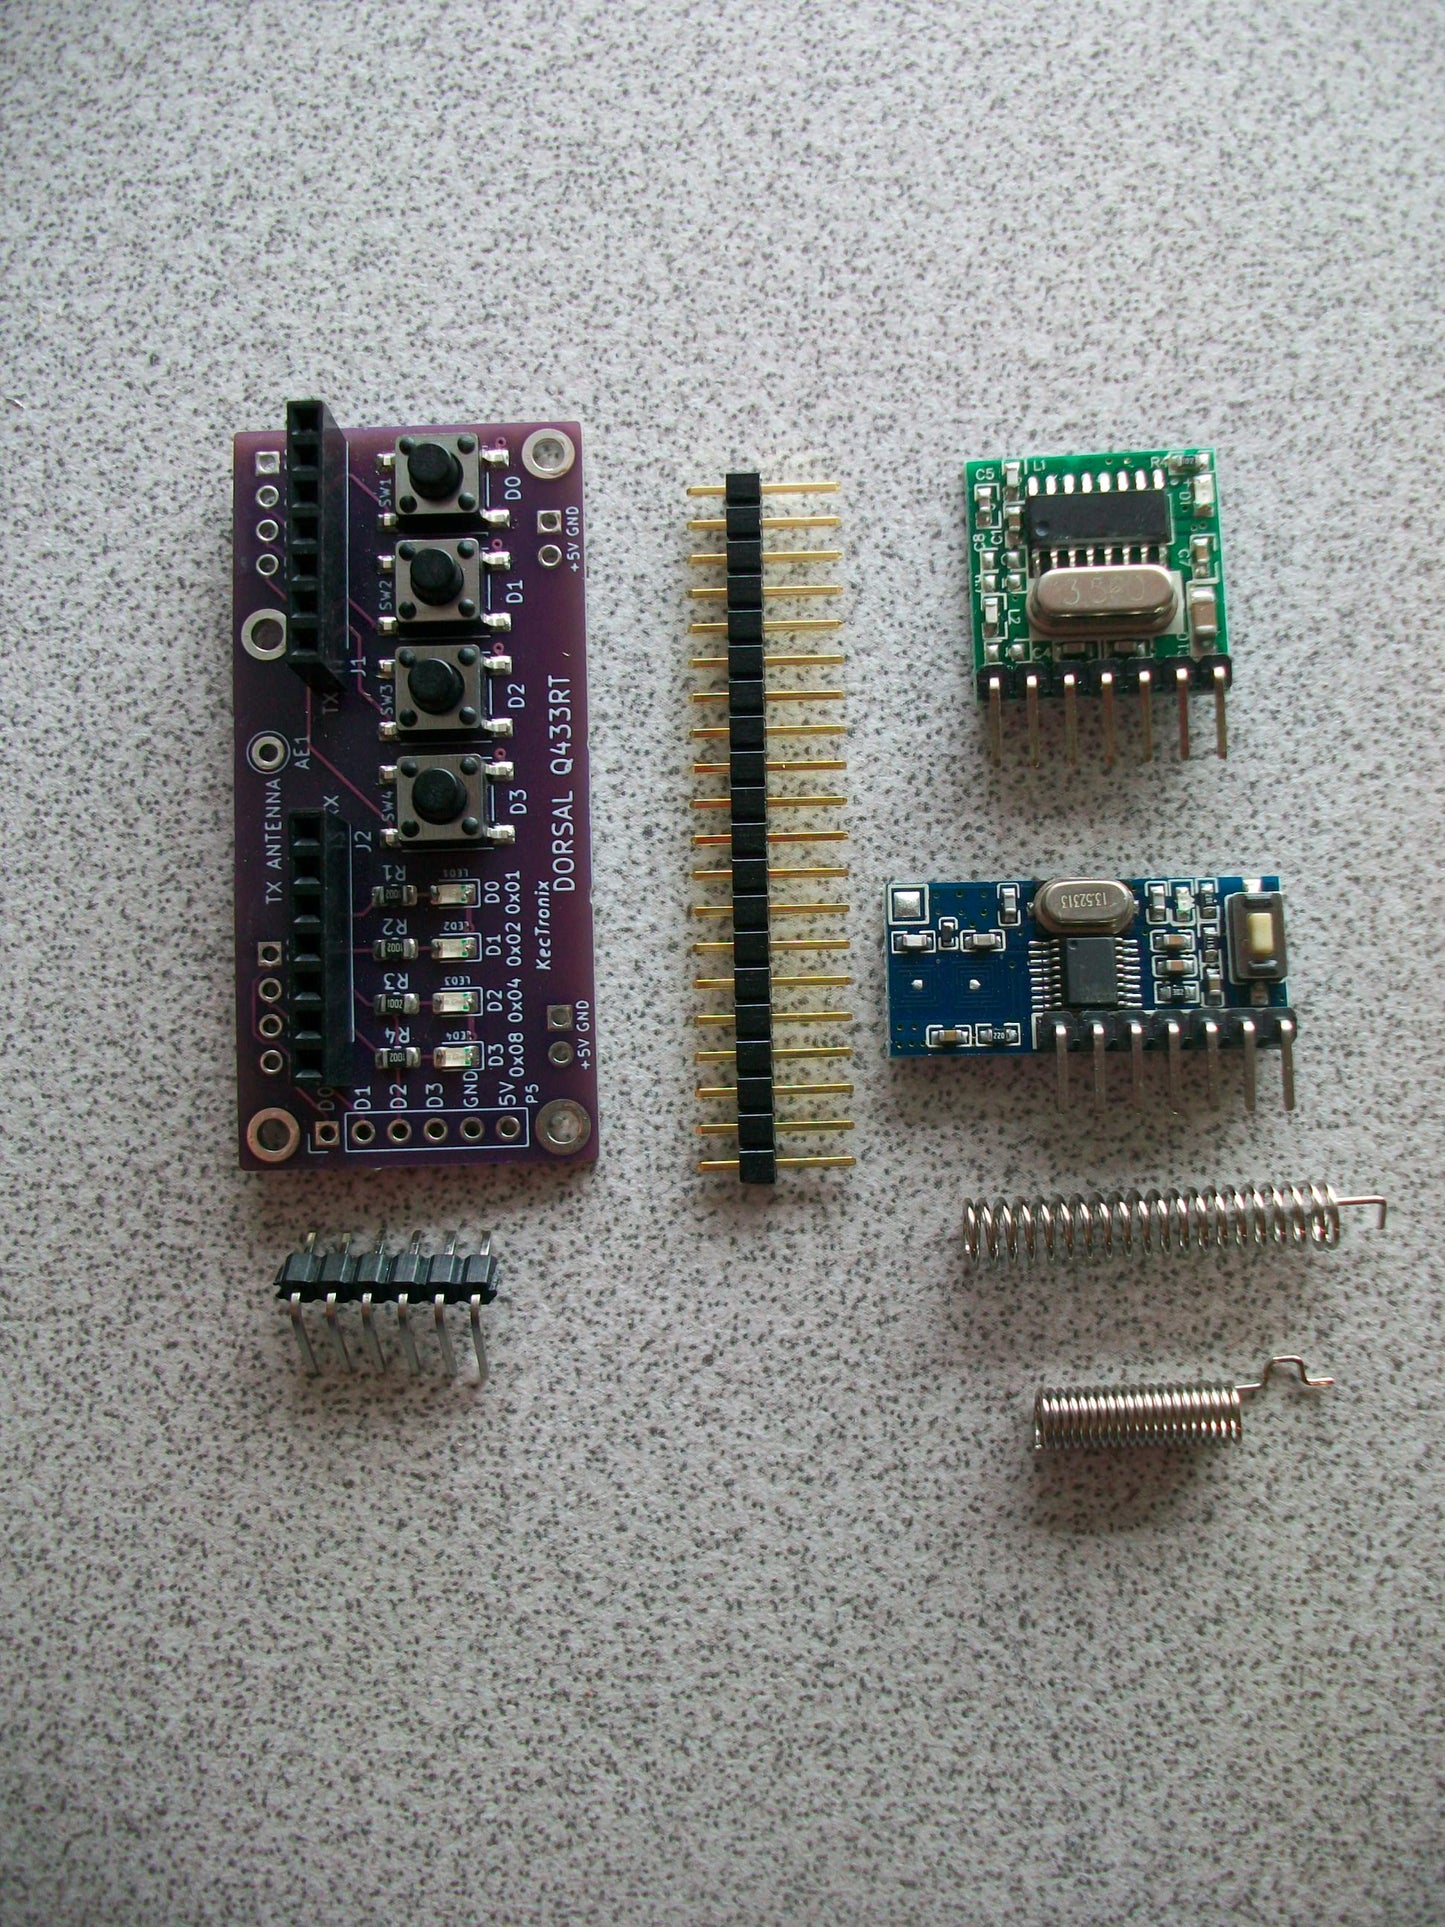 Dorsal Q433RT Dolphin daughterboard for testing 433Mhz Sub-GHz